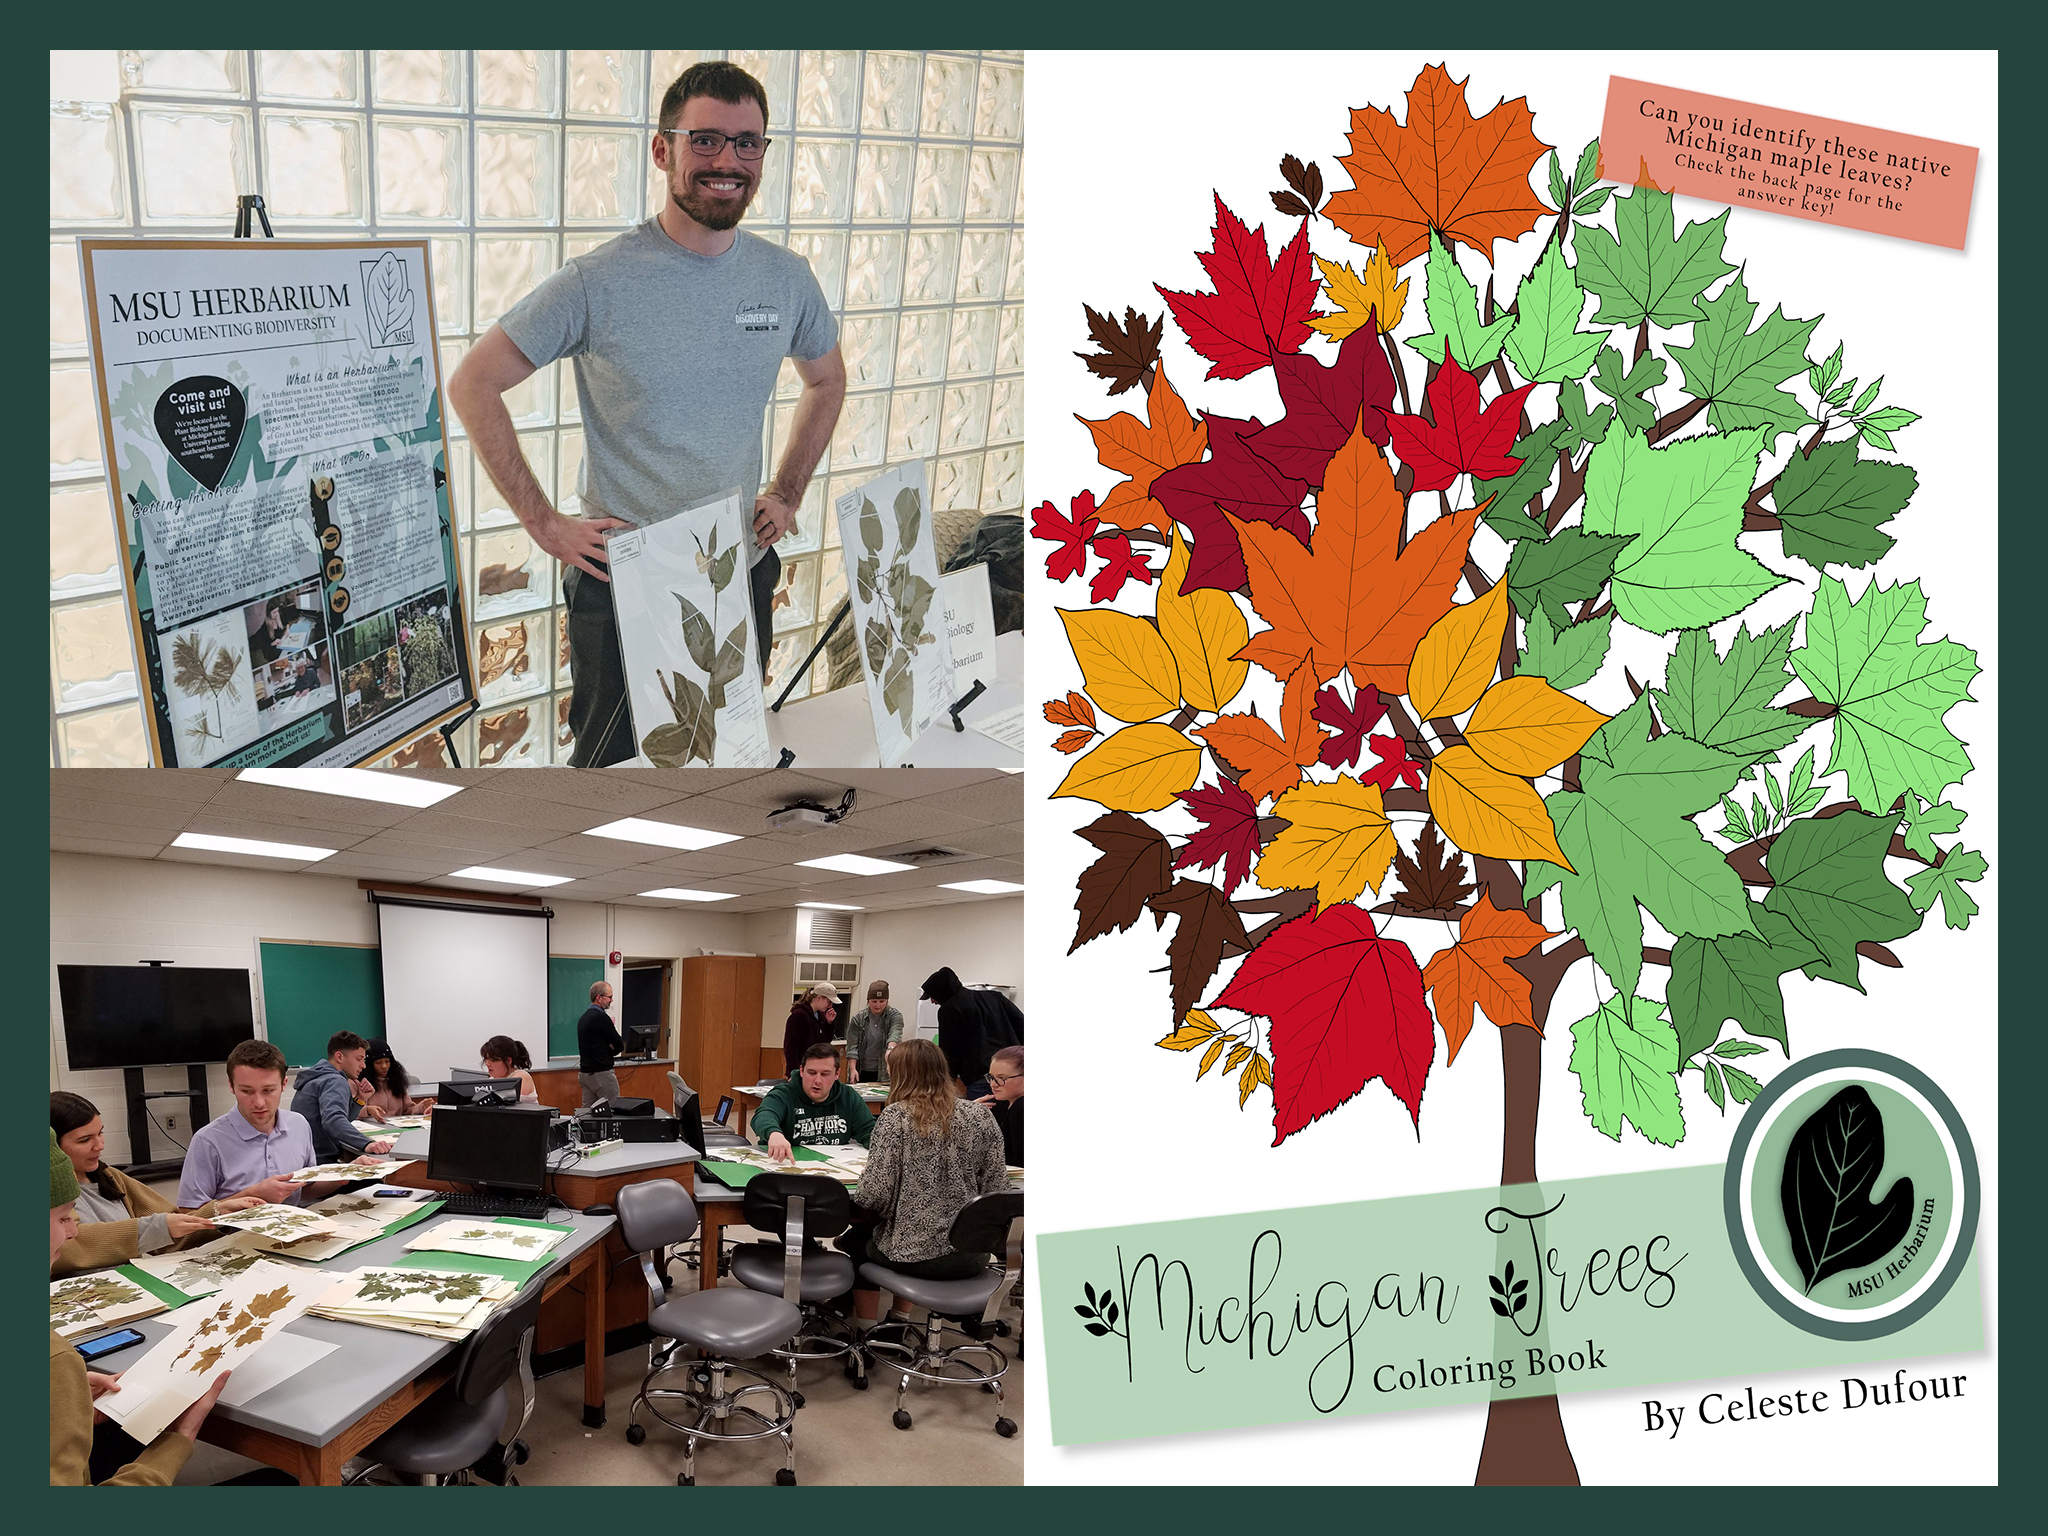 Top left: man at table with plants and a poster. Bottom left: classroom with students at desks. Right: colorful tree labelled "Michigan Trees Coloring Book by Celeste Dufour"